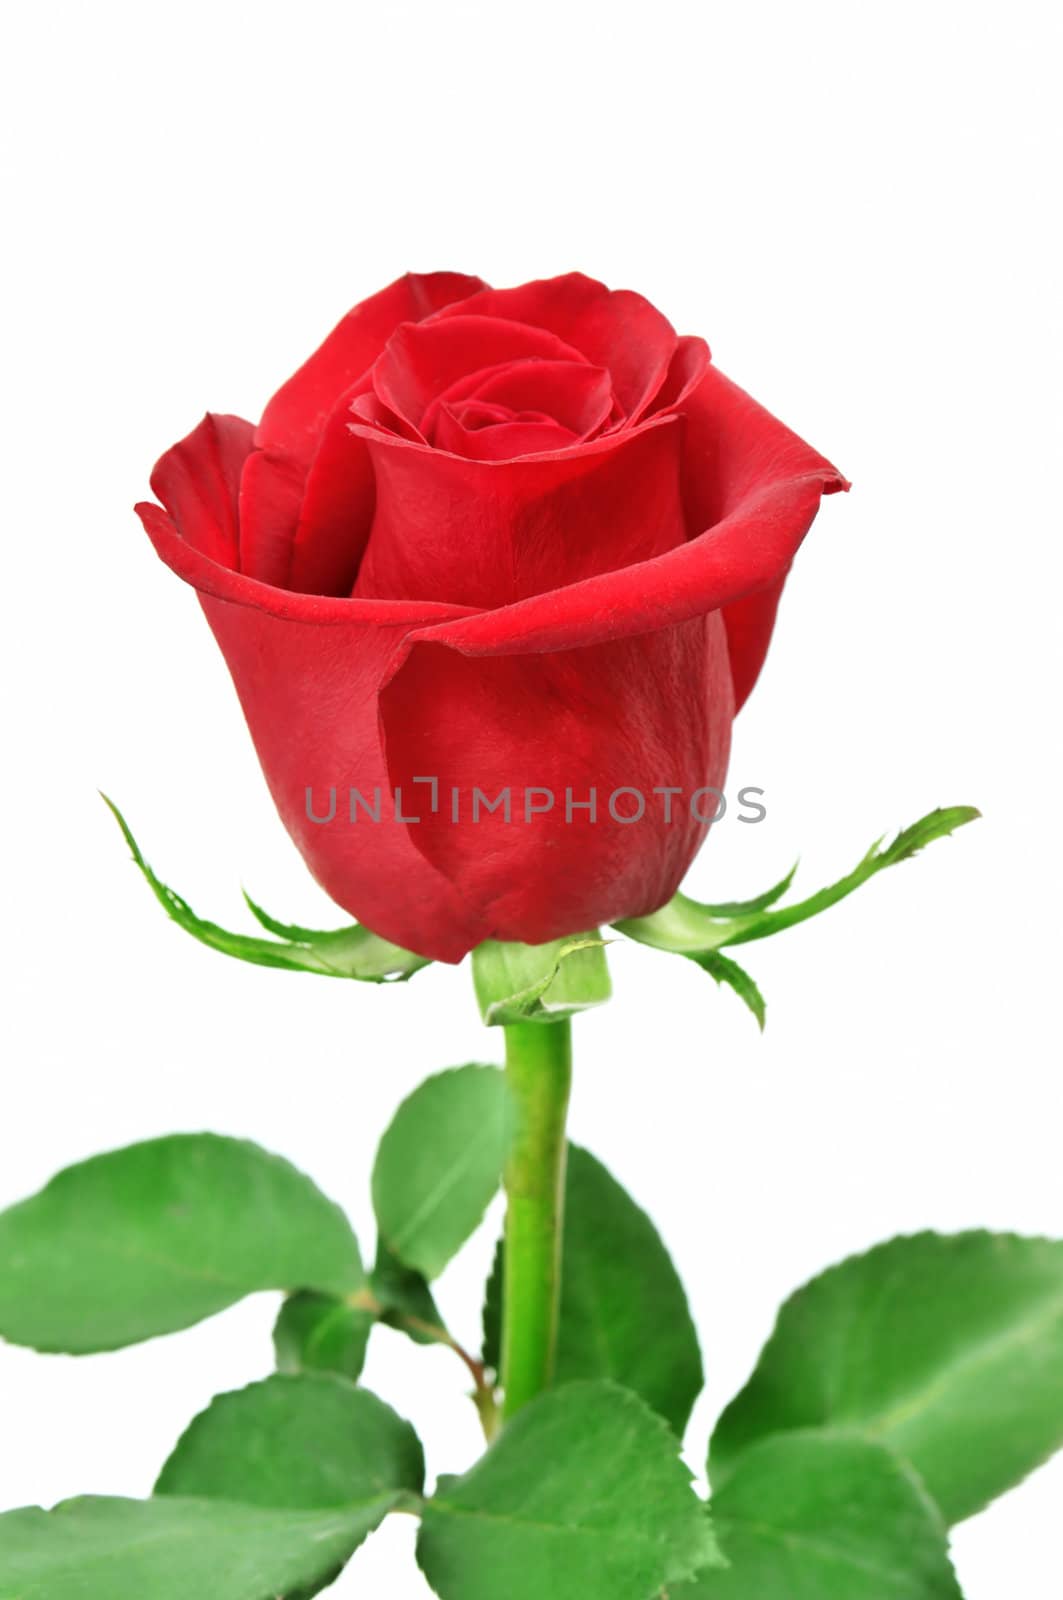 Beautiful red rose by Serg64